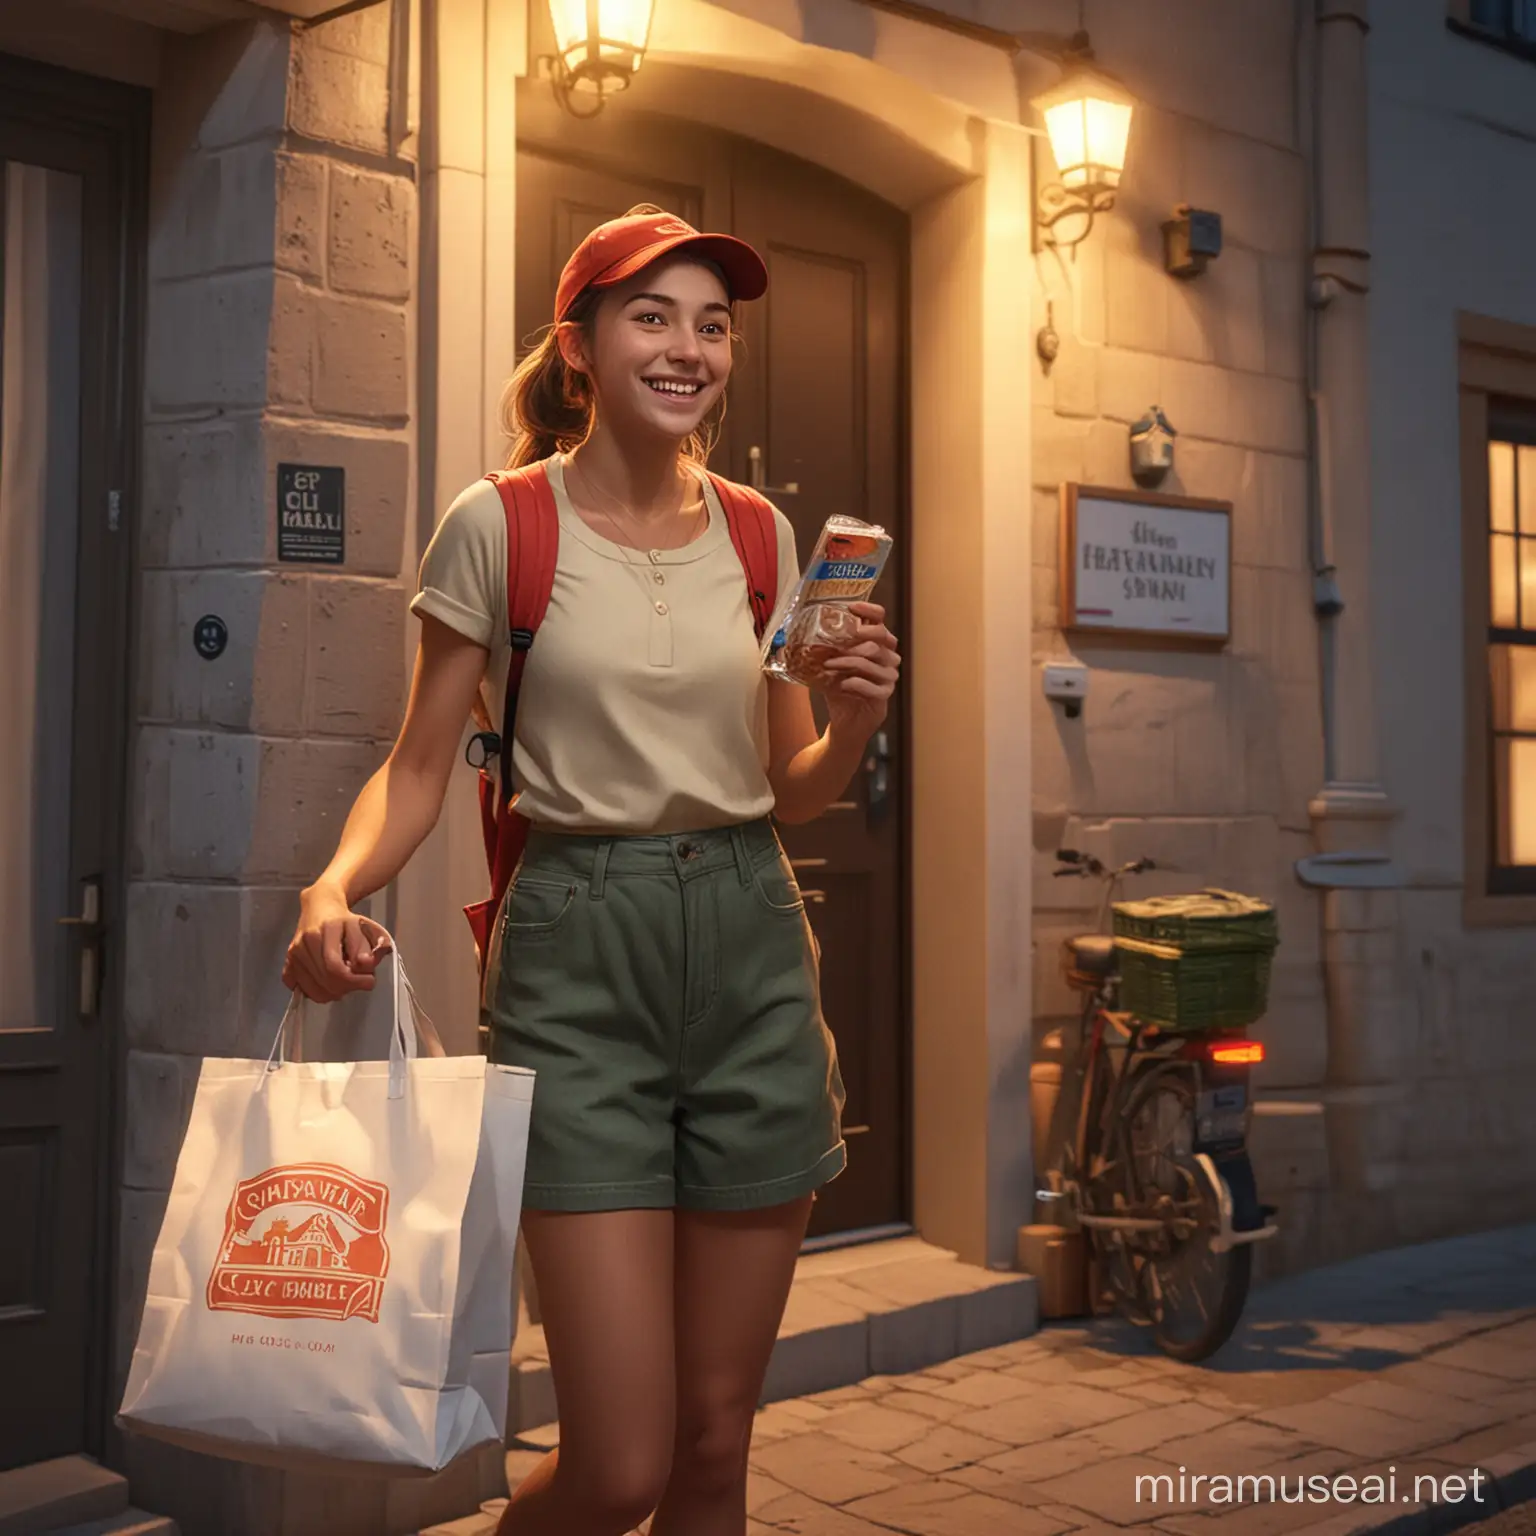 sim city in night. city lights. a girl(smiles, takeaway bag in her hand) is talking to a food delivery driver boy in front of her  house door  in Spain. sim city style.